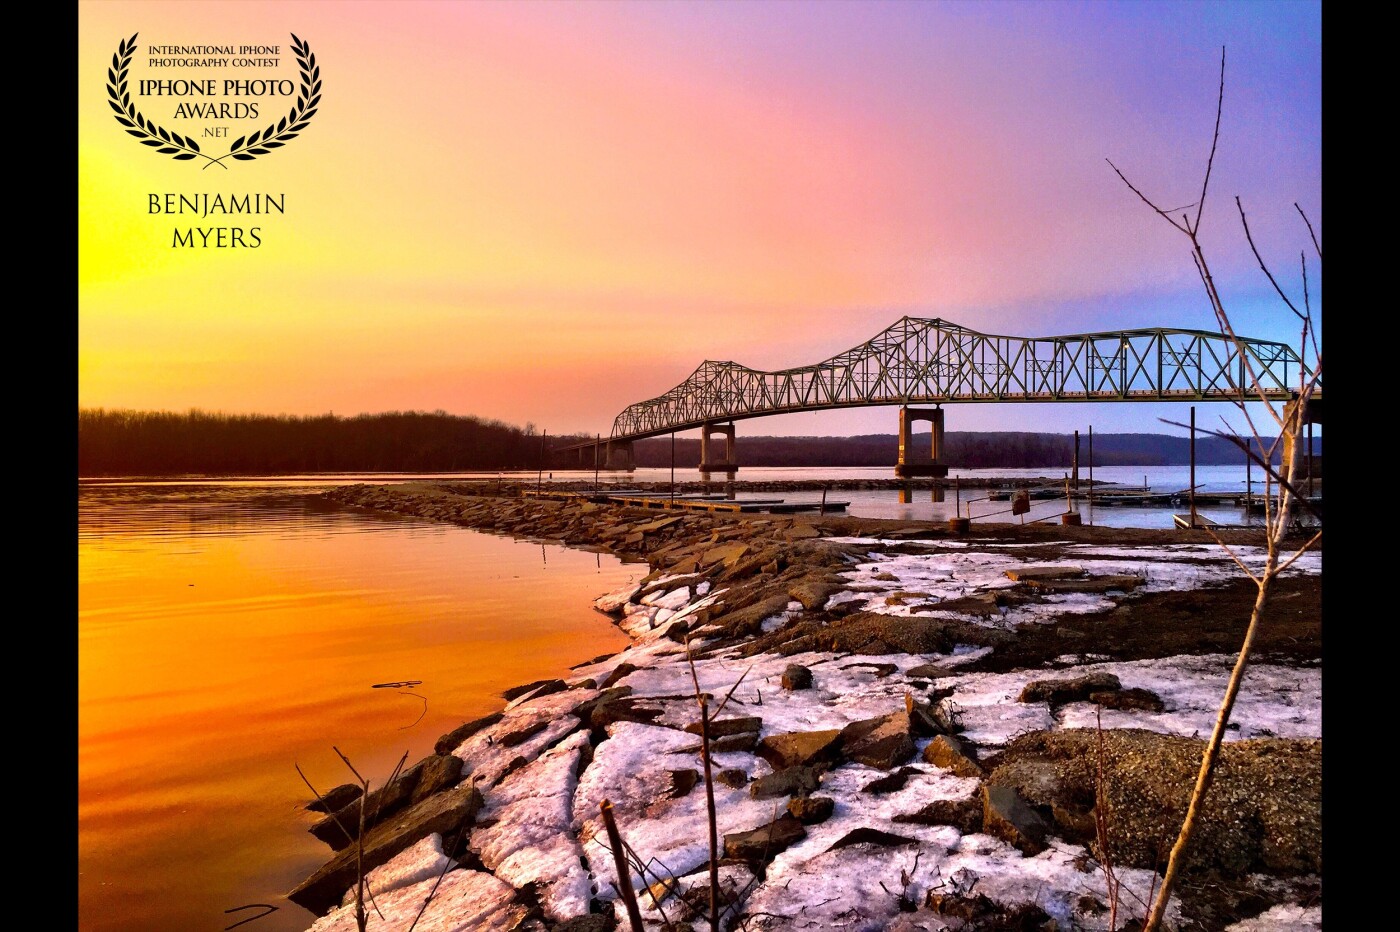 This shot was taken at sunset in Lacon, Illinois. The bridge crosses the Illinois river and has been the star of many photos taken by a fellow photographer. The calm river was mirroring the sky and we sat there taking photos until the sun had completely settled out of sight. Thank you for sharing this spot @ travisguthmanphotography! 